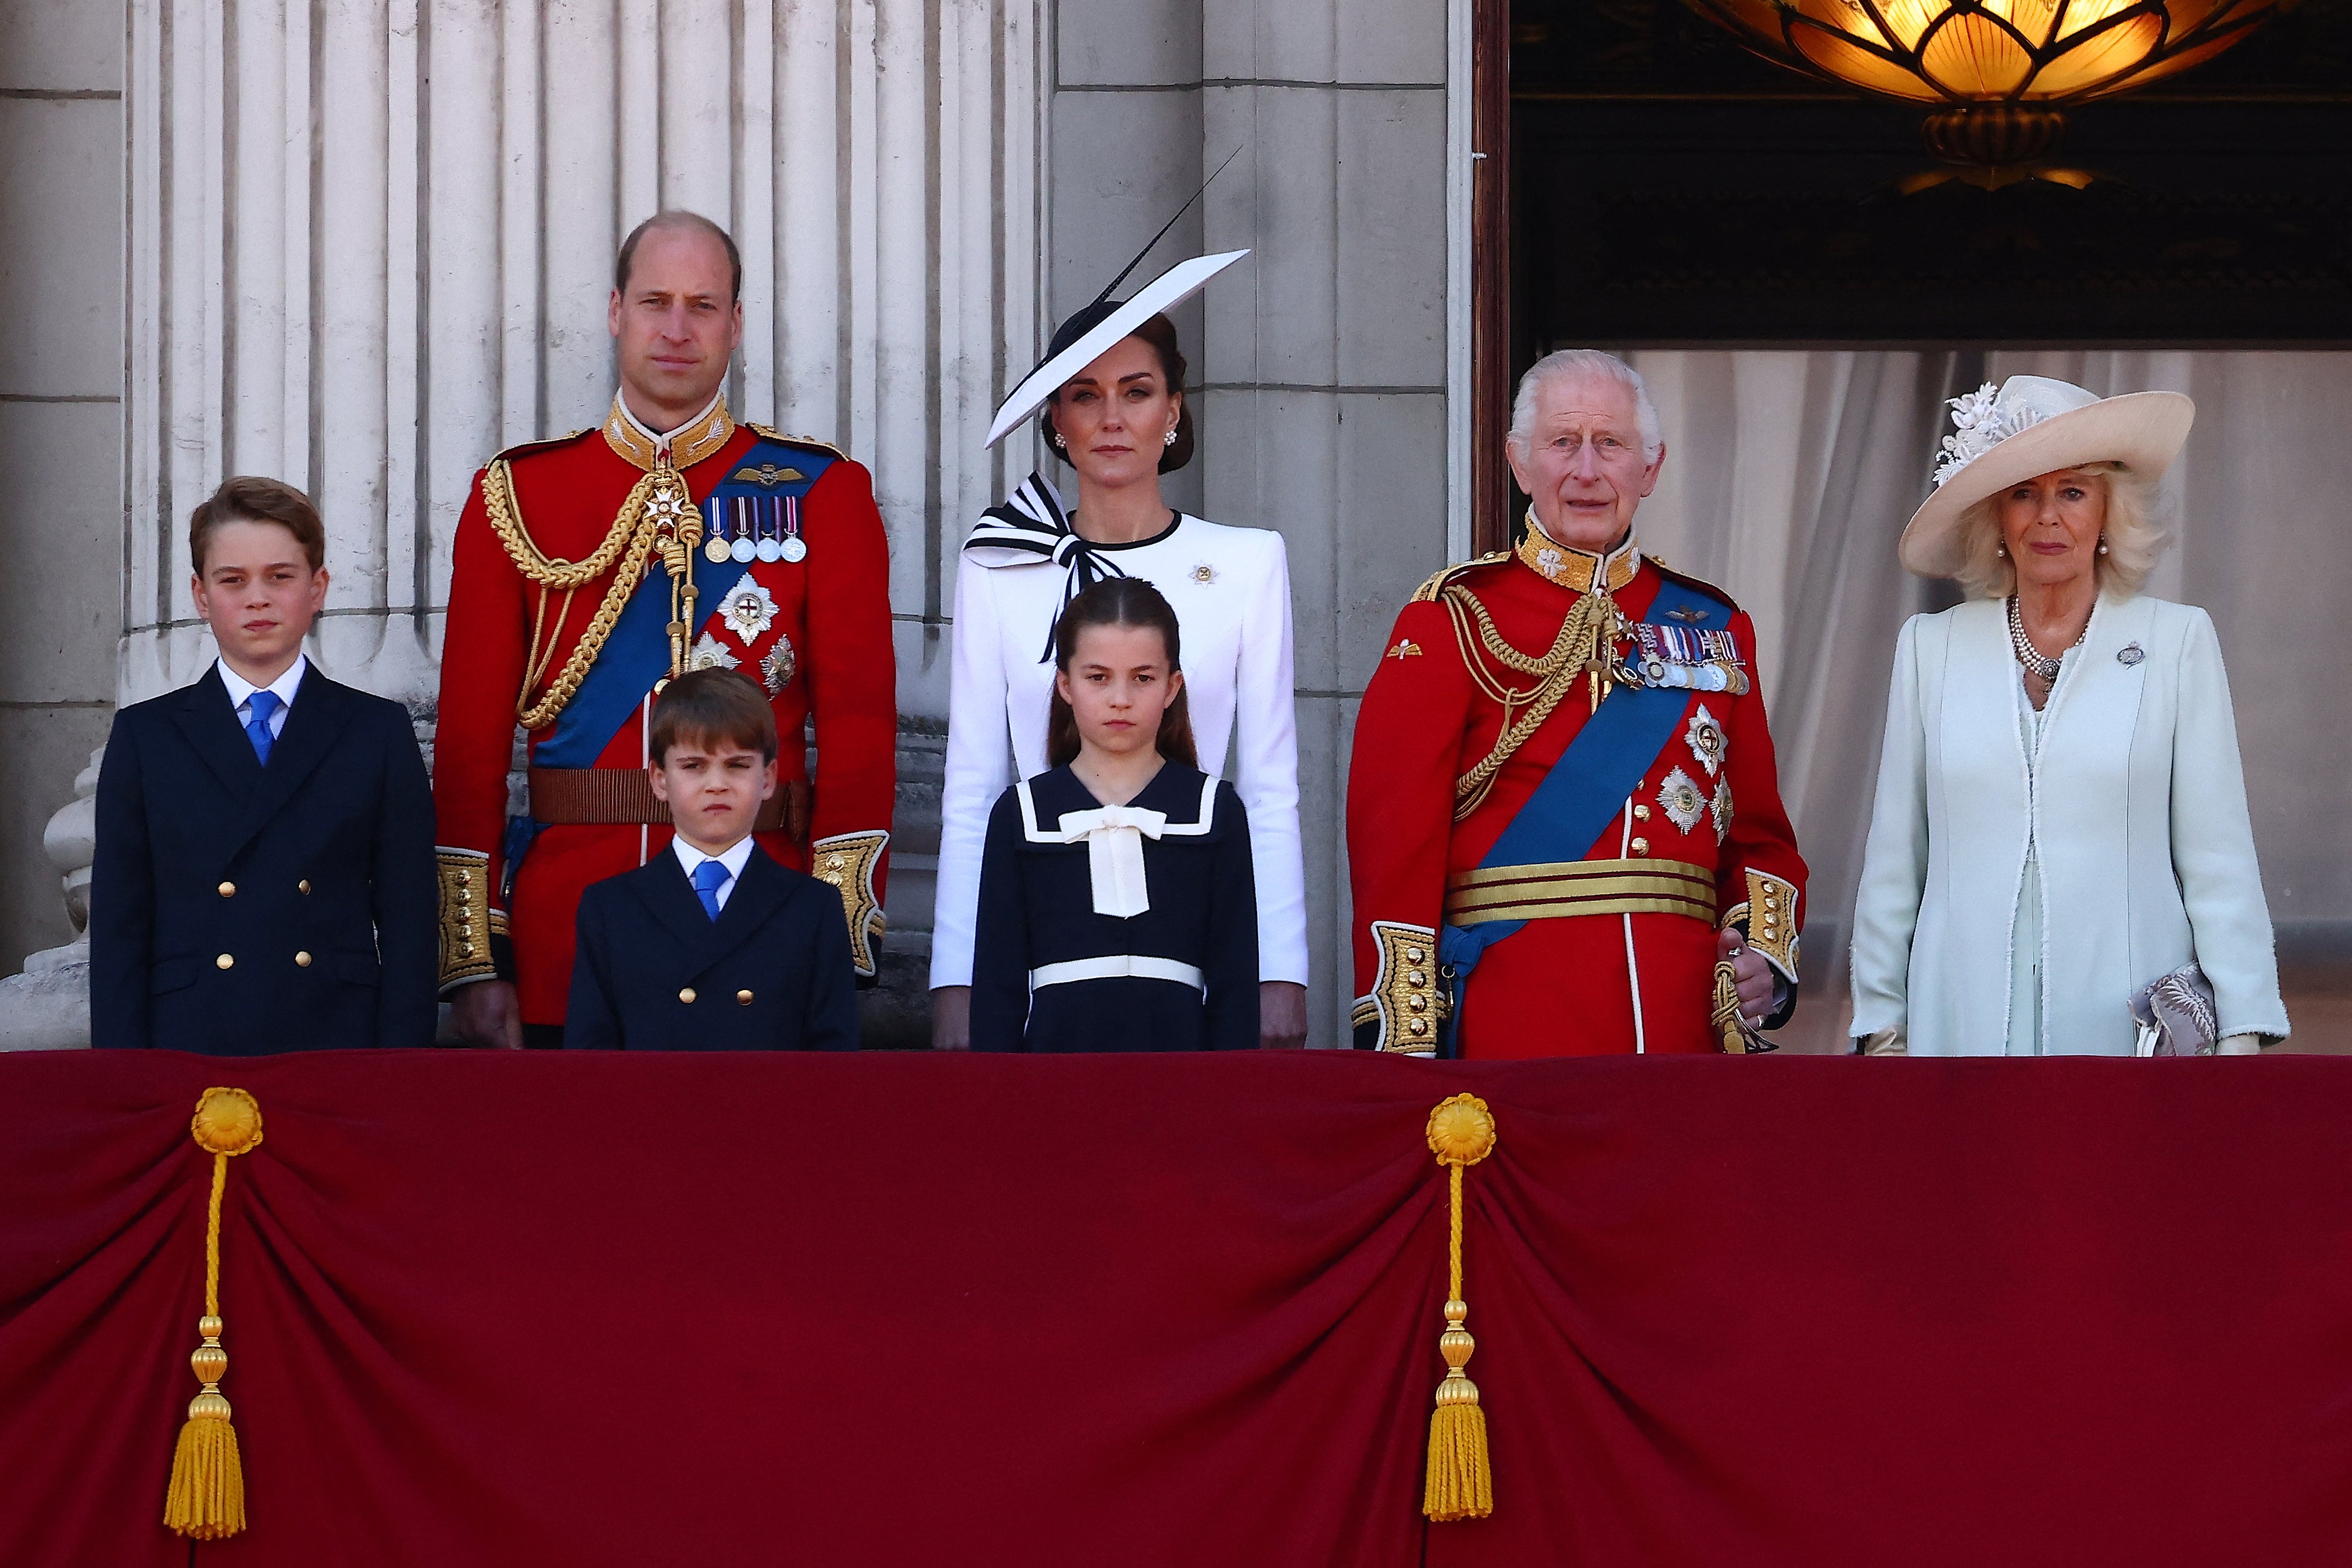 Prince Charles joins the royal family on the balcony of Buckingham Palace.